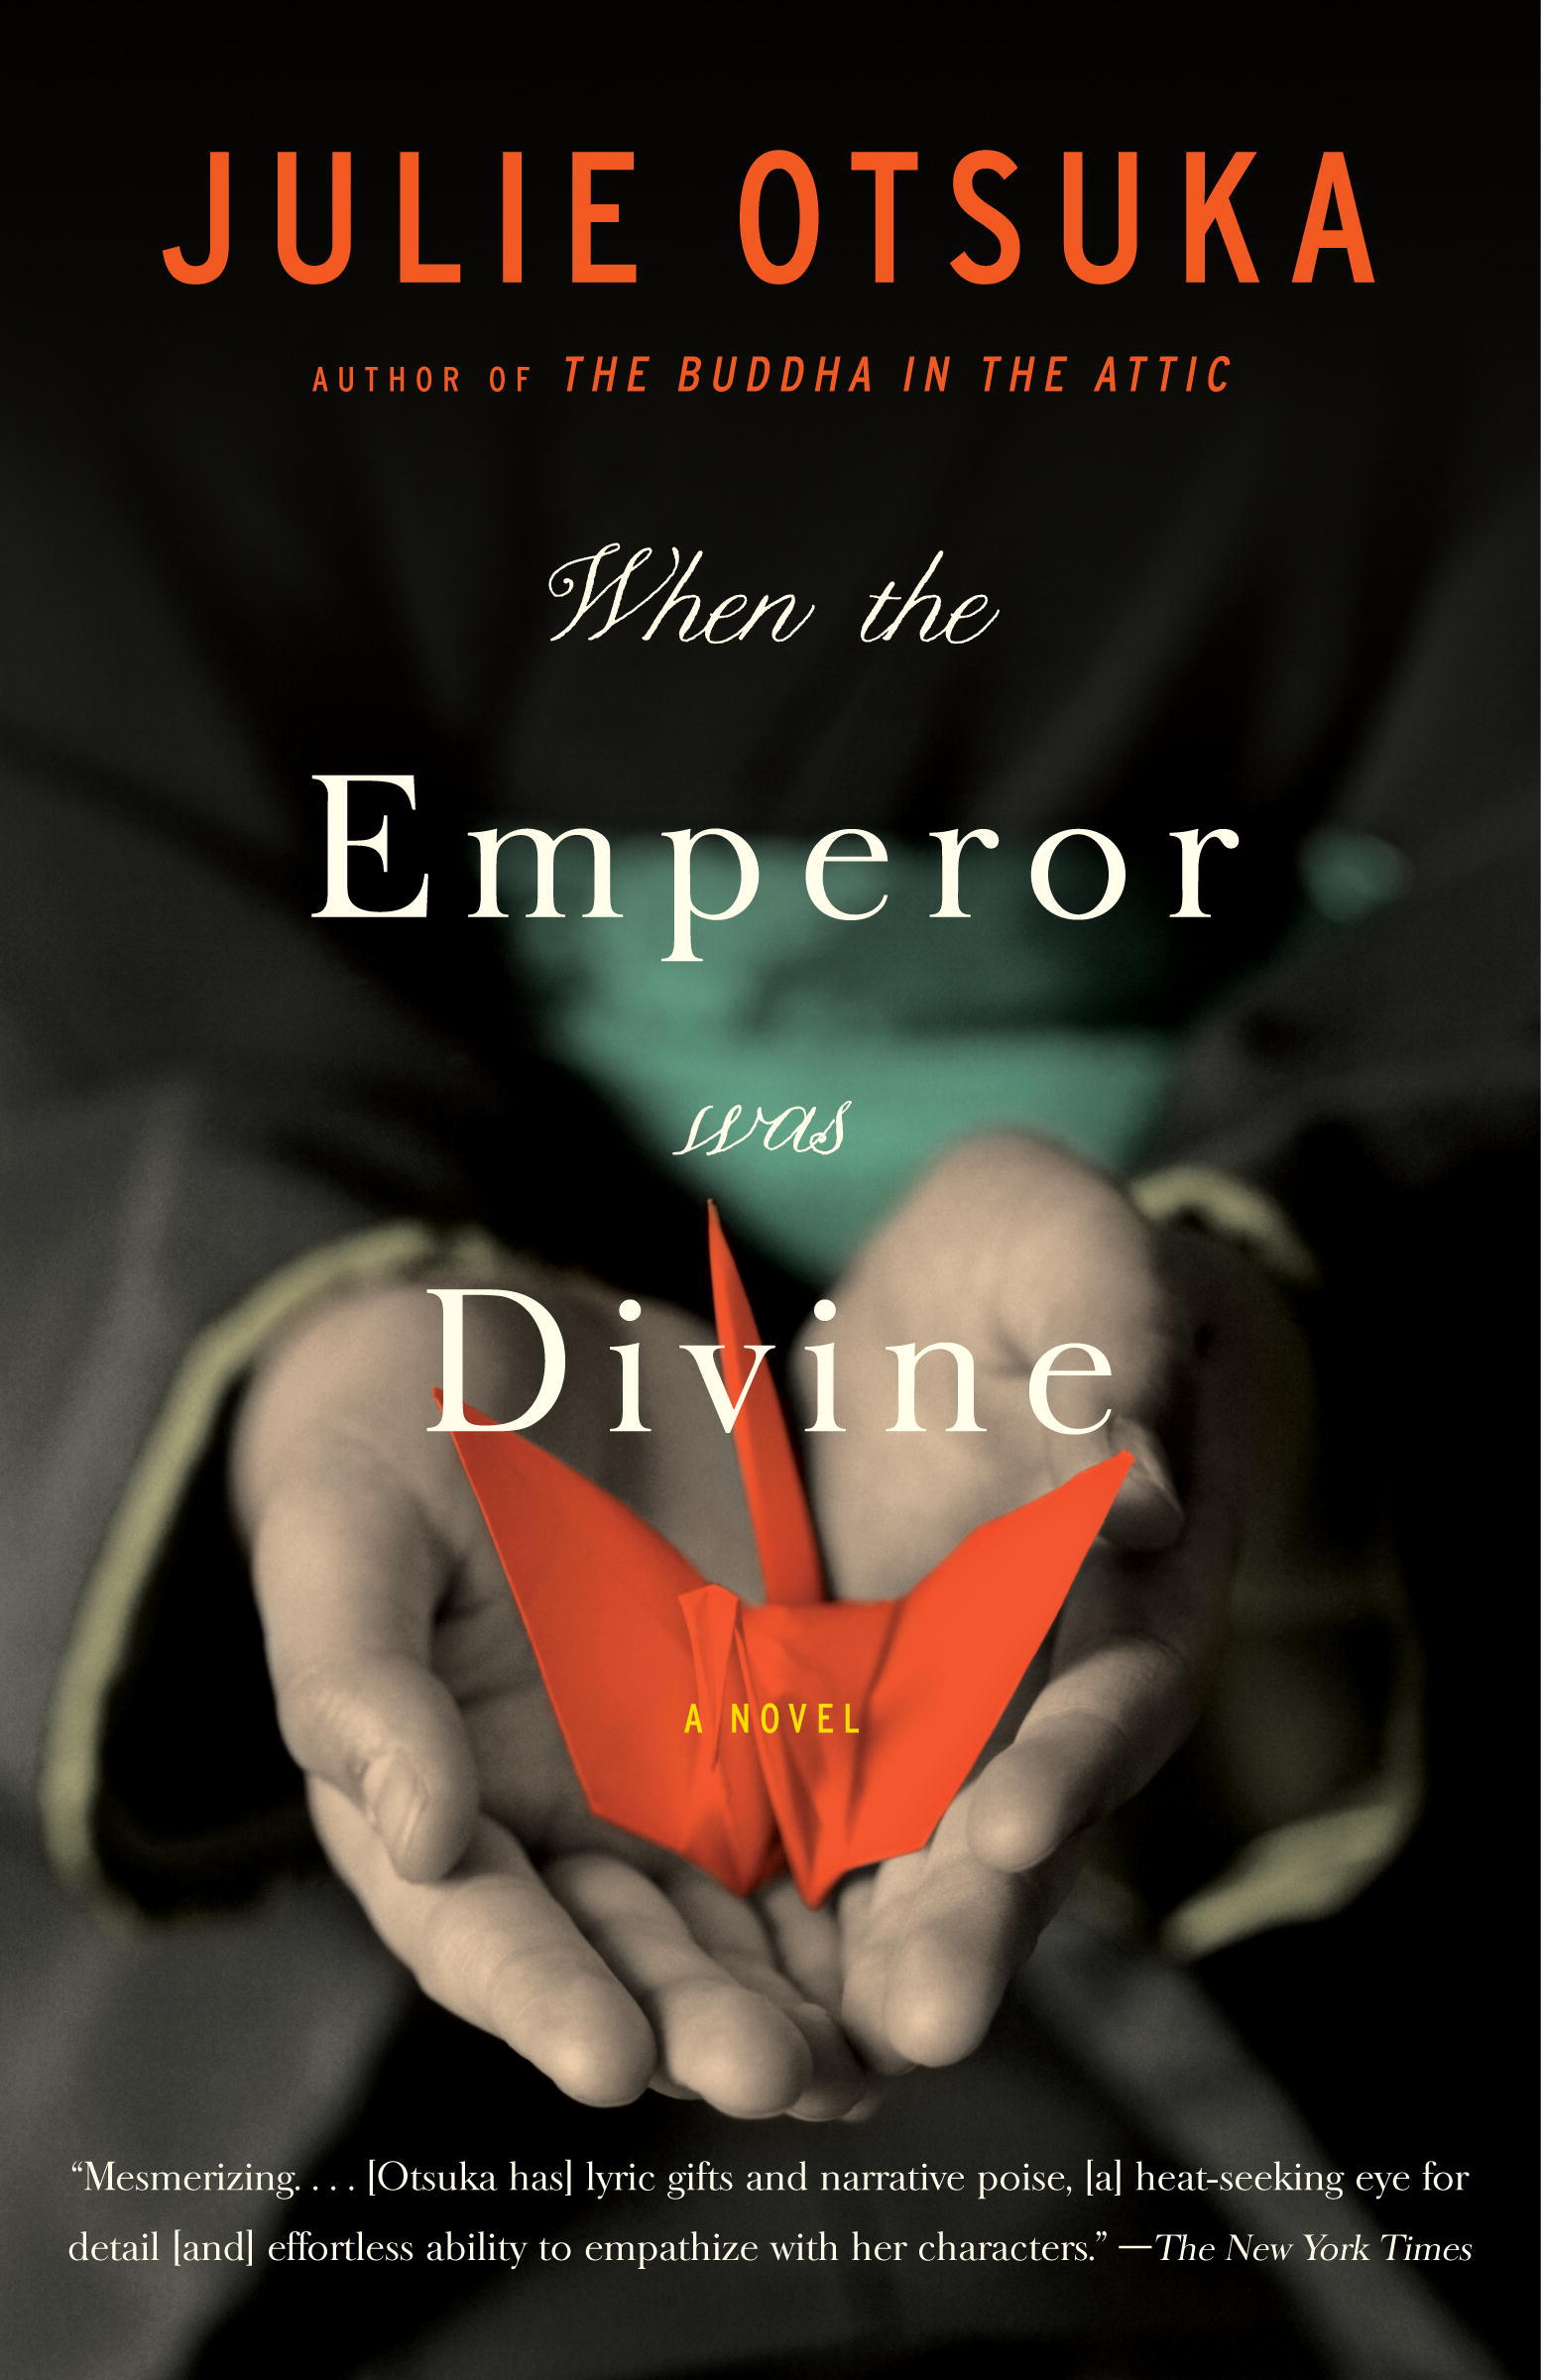 Book cover: author name in all caps orange, title in white against a background of two hands offering an orange origami bird